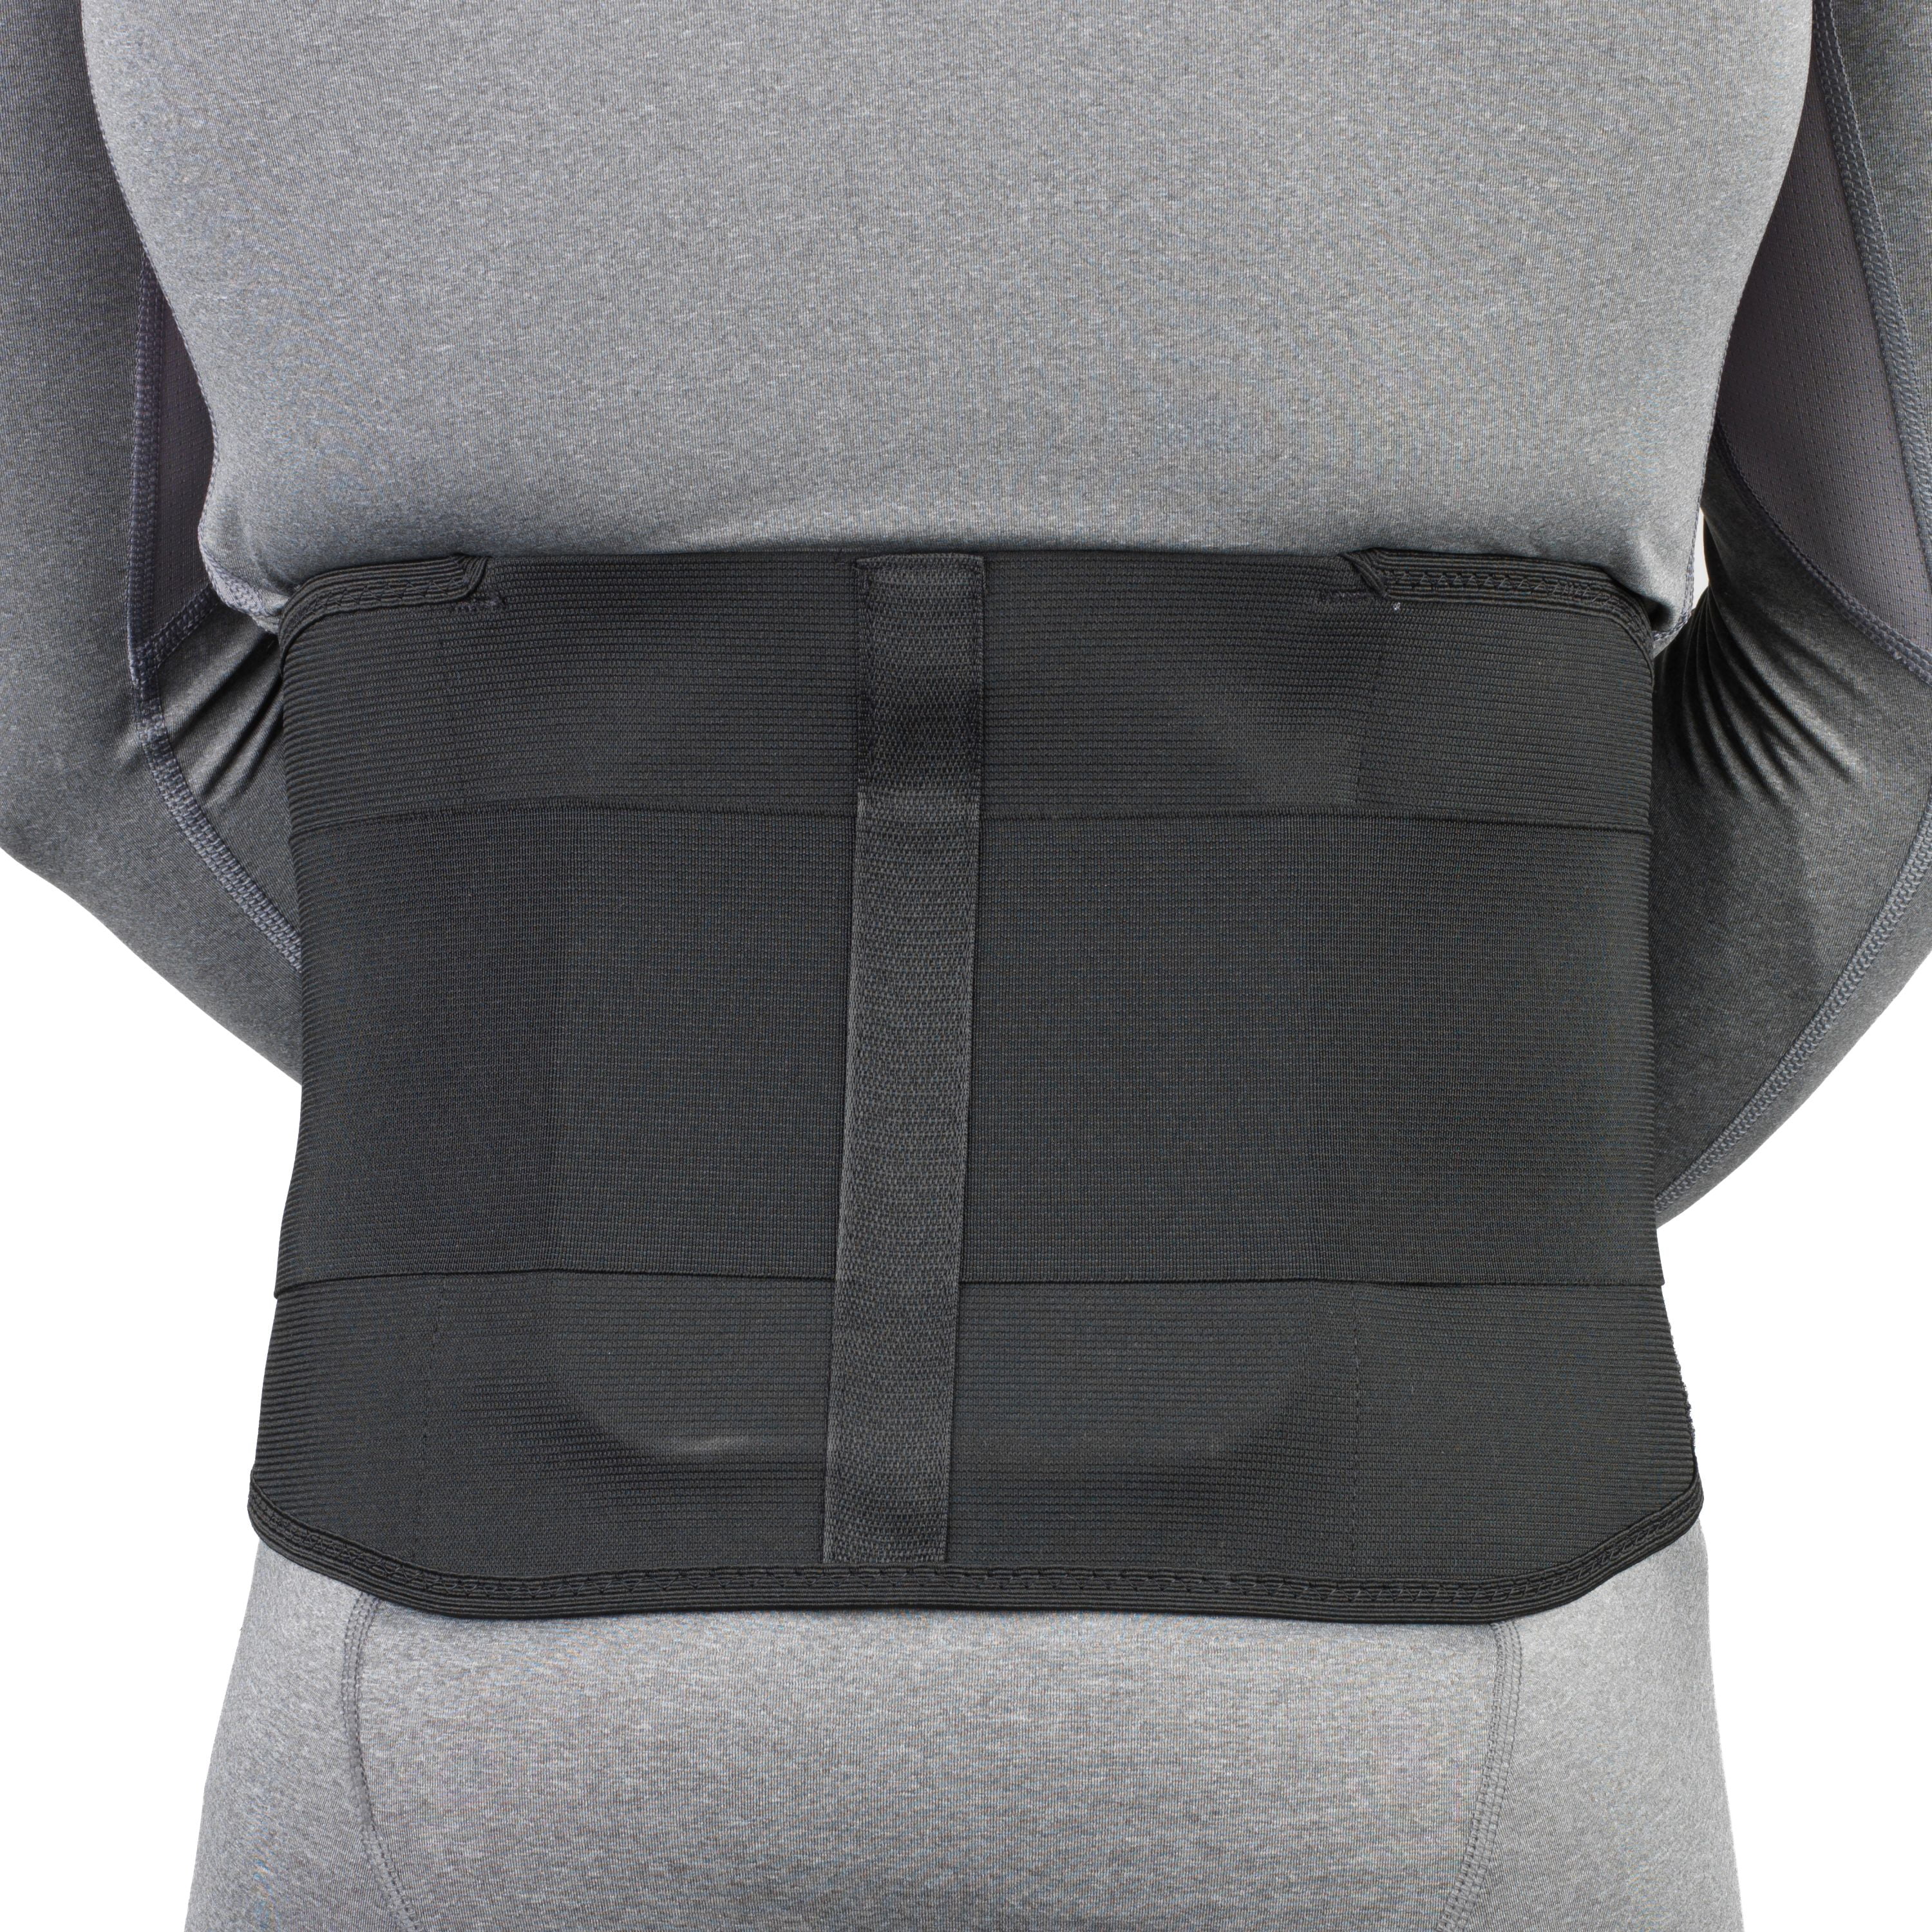 Back Support Brace, Mercase Breathable Mesh Lumbar Support Belt with 7  Stays Replaceable for Lower Back Pain Relief for Men and Women, Sciatica,  Herniated Disc, Scoliosis (M) 